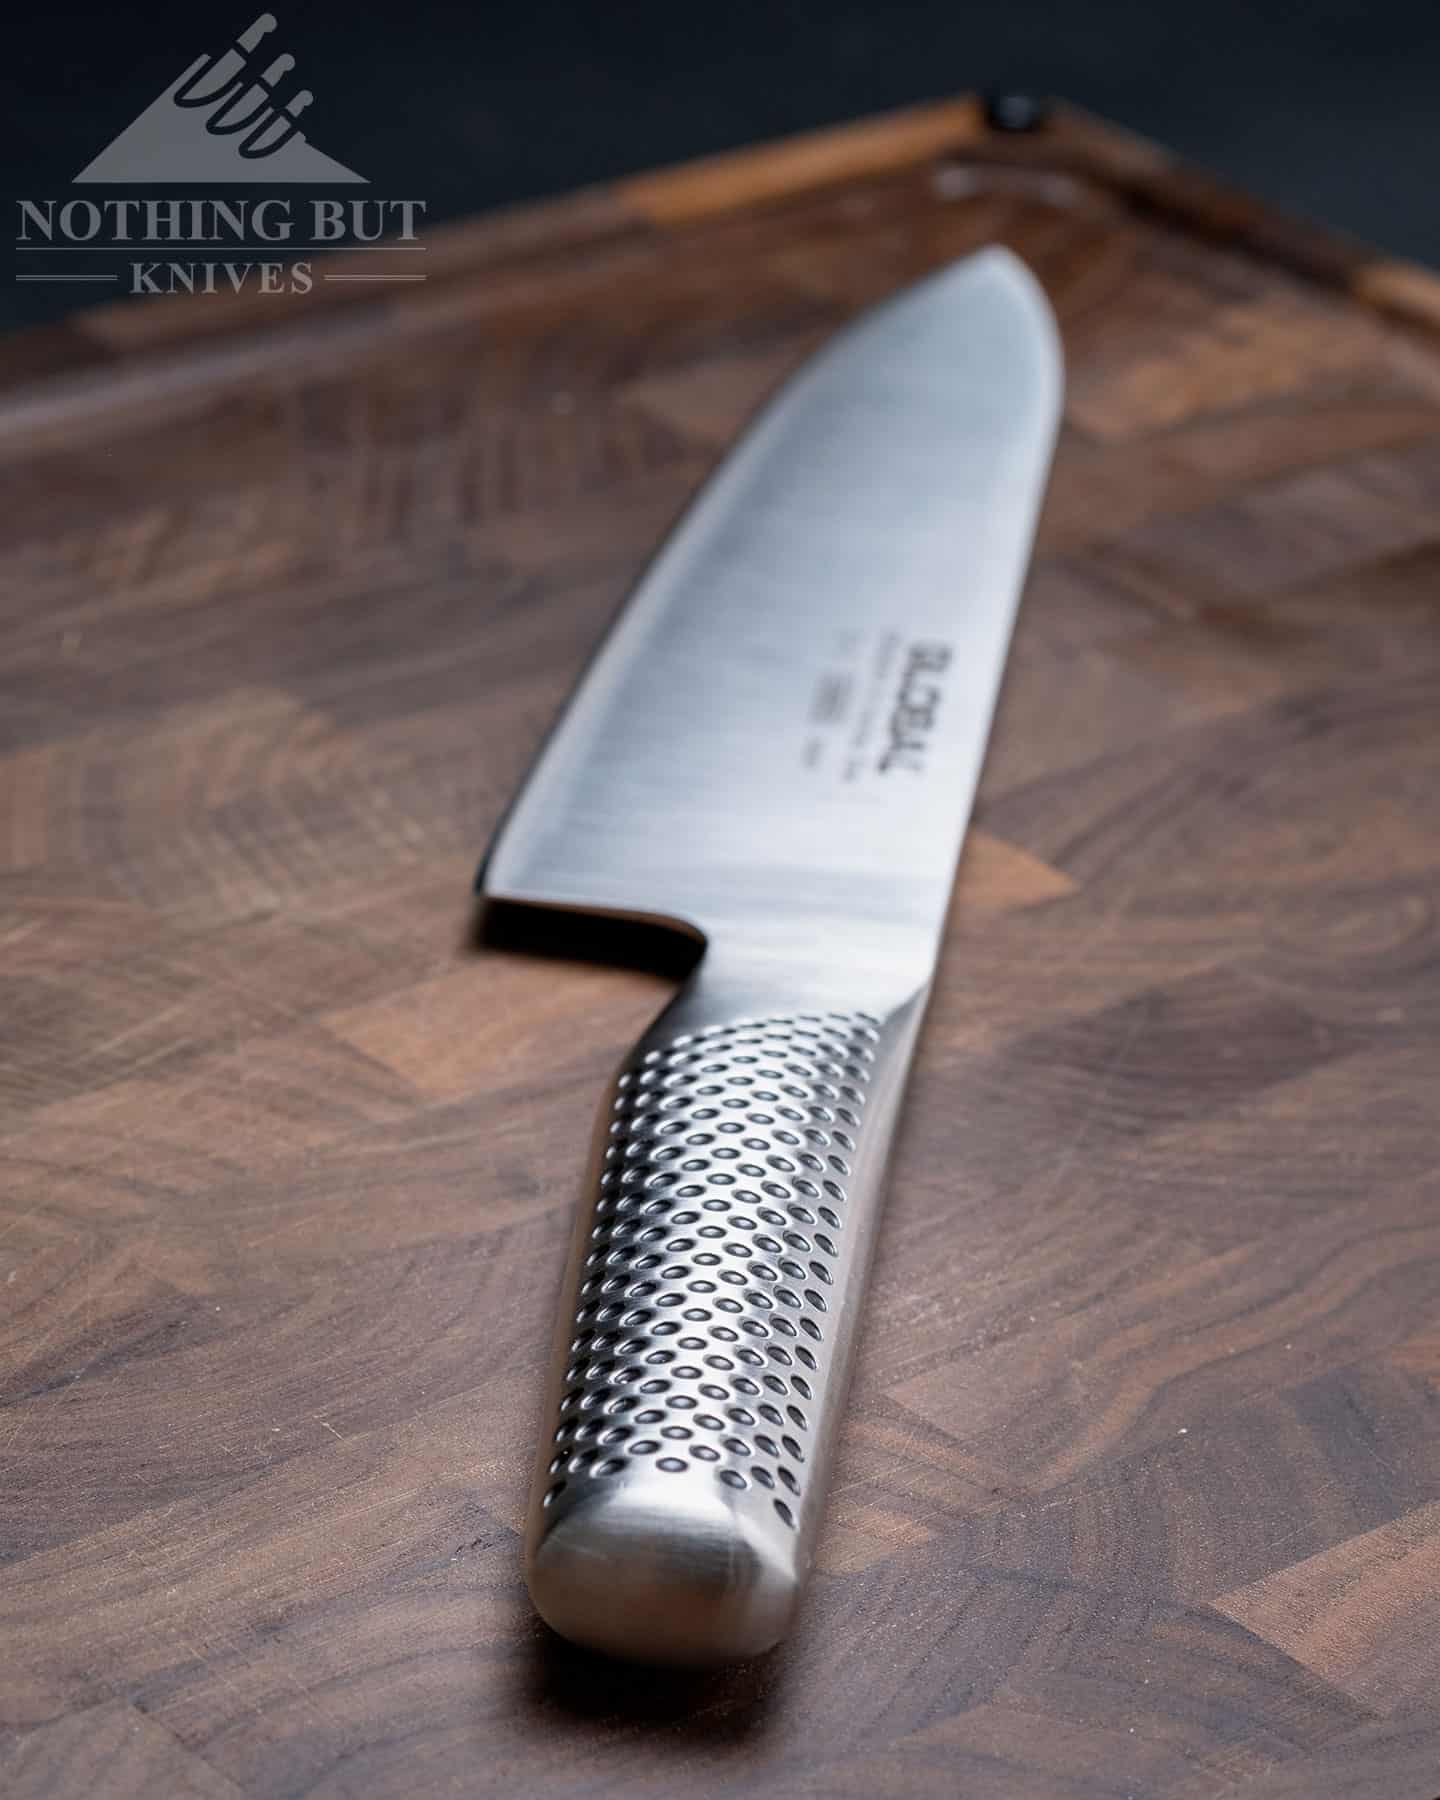  Global Knives 8 Chef's Knife (G-2) with 220/GB Knife